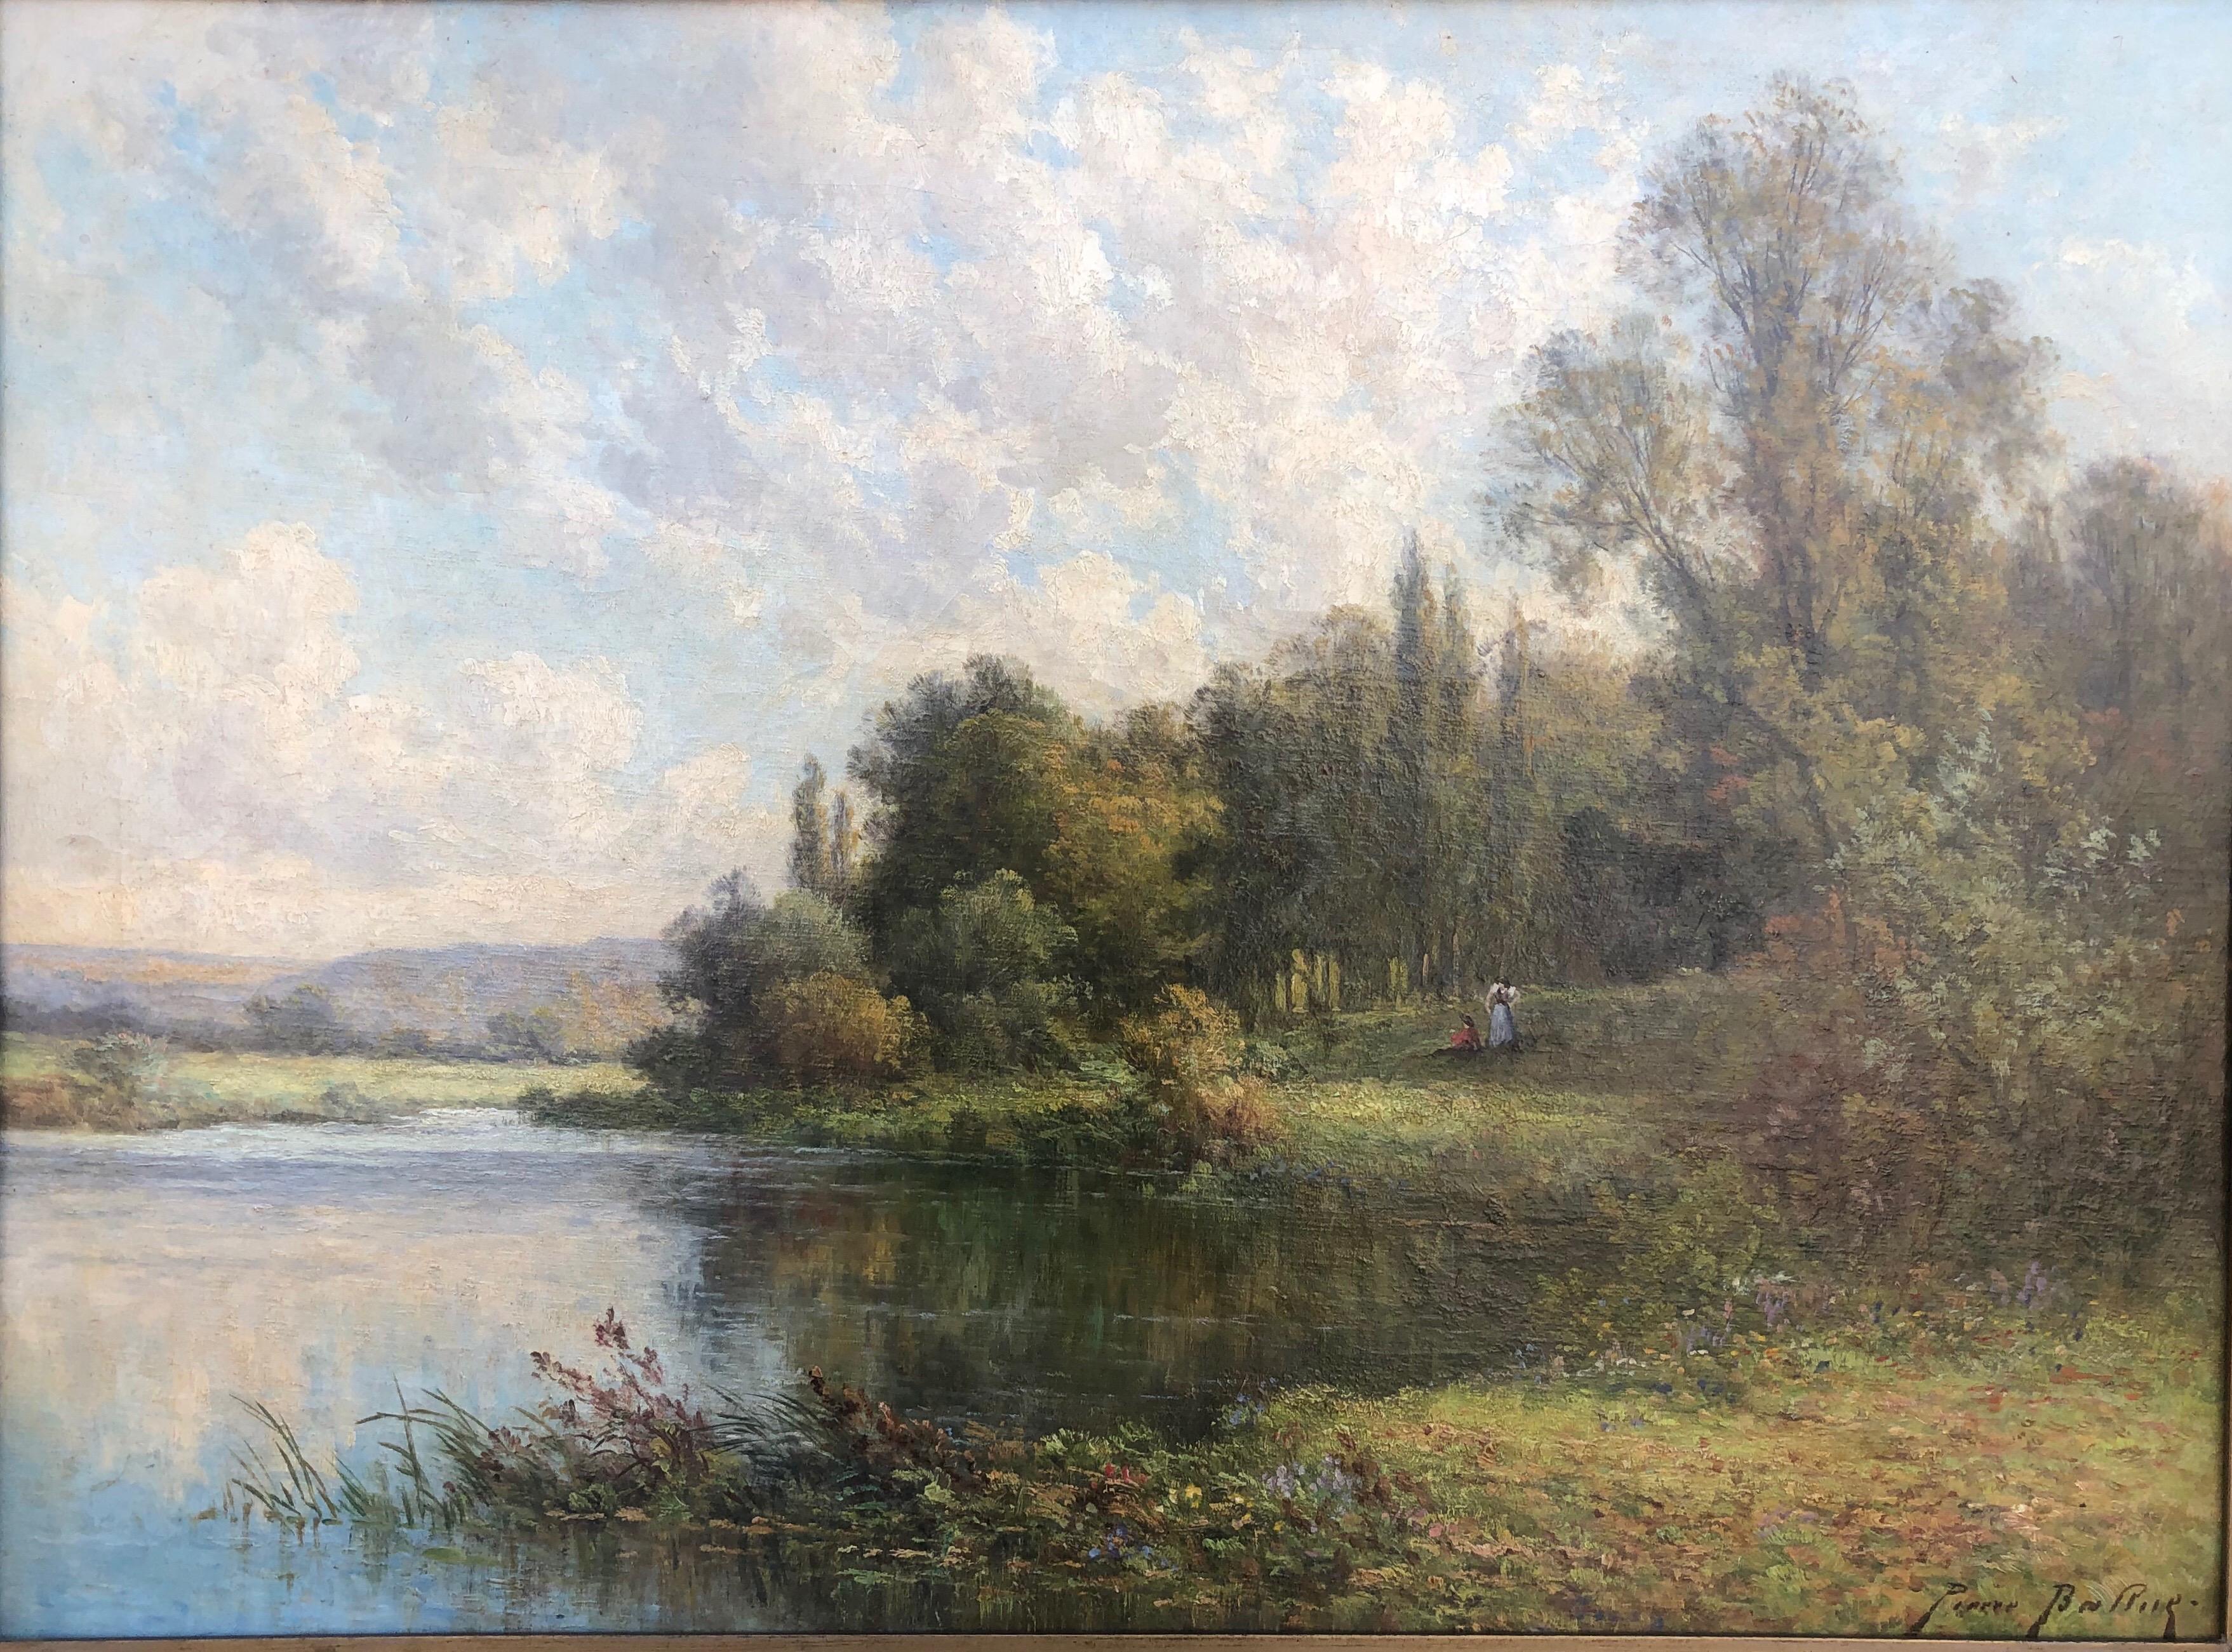 Beautiful French Impressionist oil painting of a calm bucolic landscape by Pierre Ernest Ballue. The painting in original condition with original giltwood frame.
Pierre Ernest Ballue
French, 1855–1928

Balluet was a pupil of Vallee, Defaux and